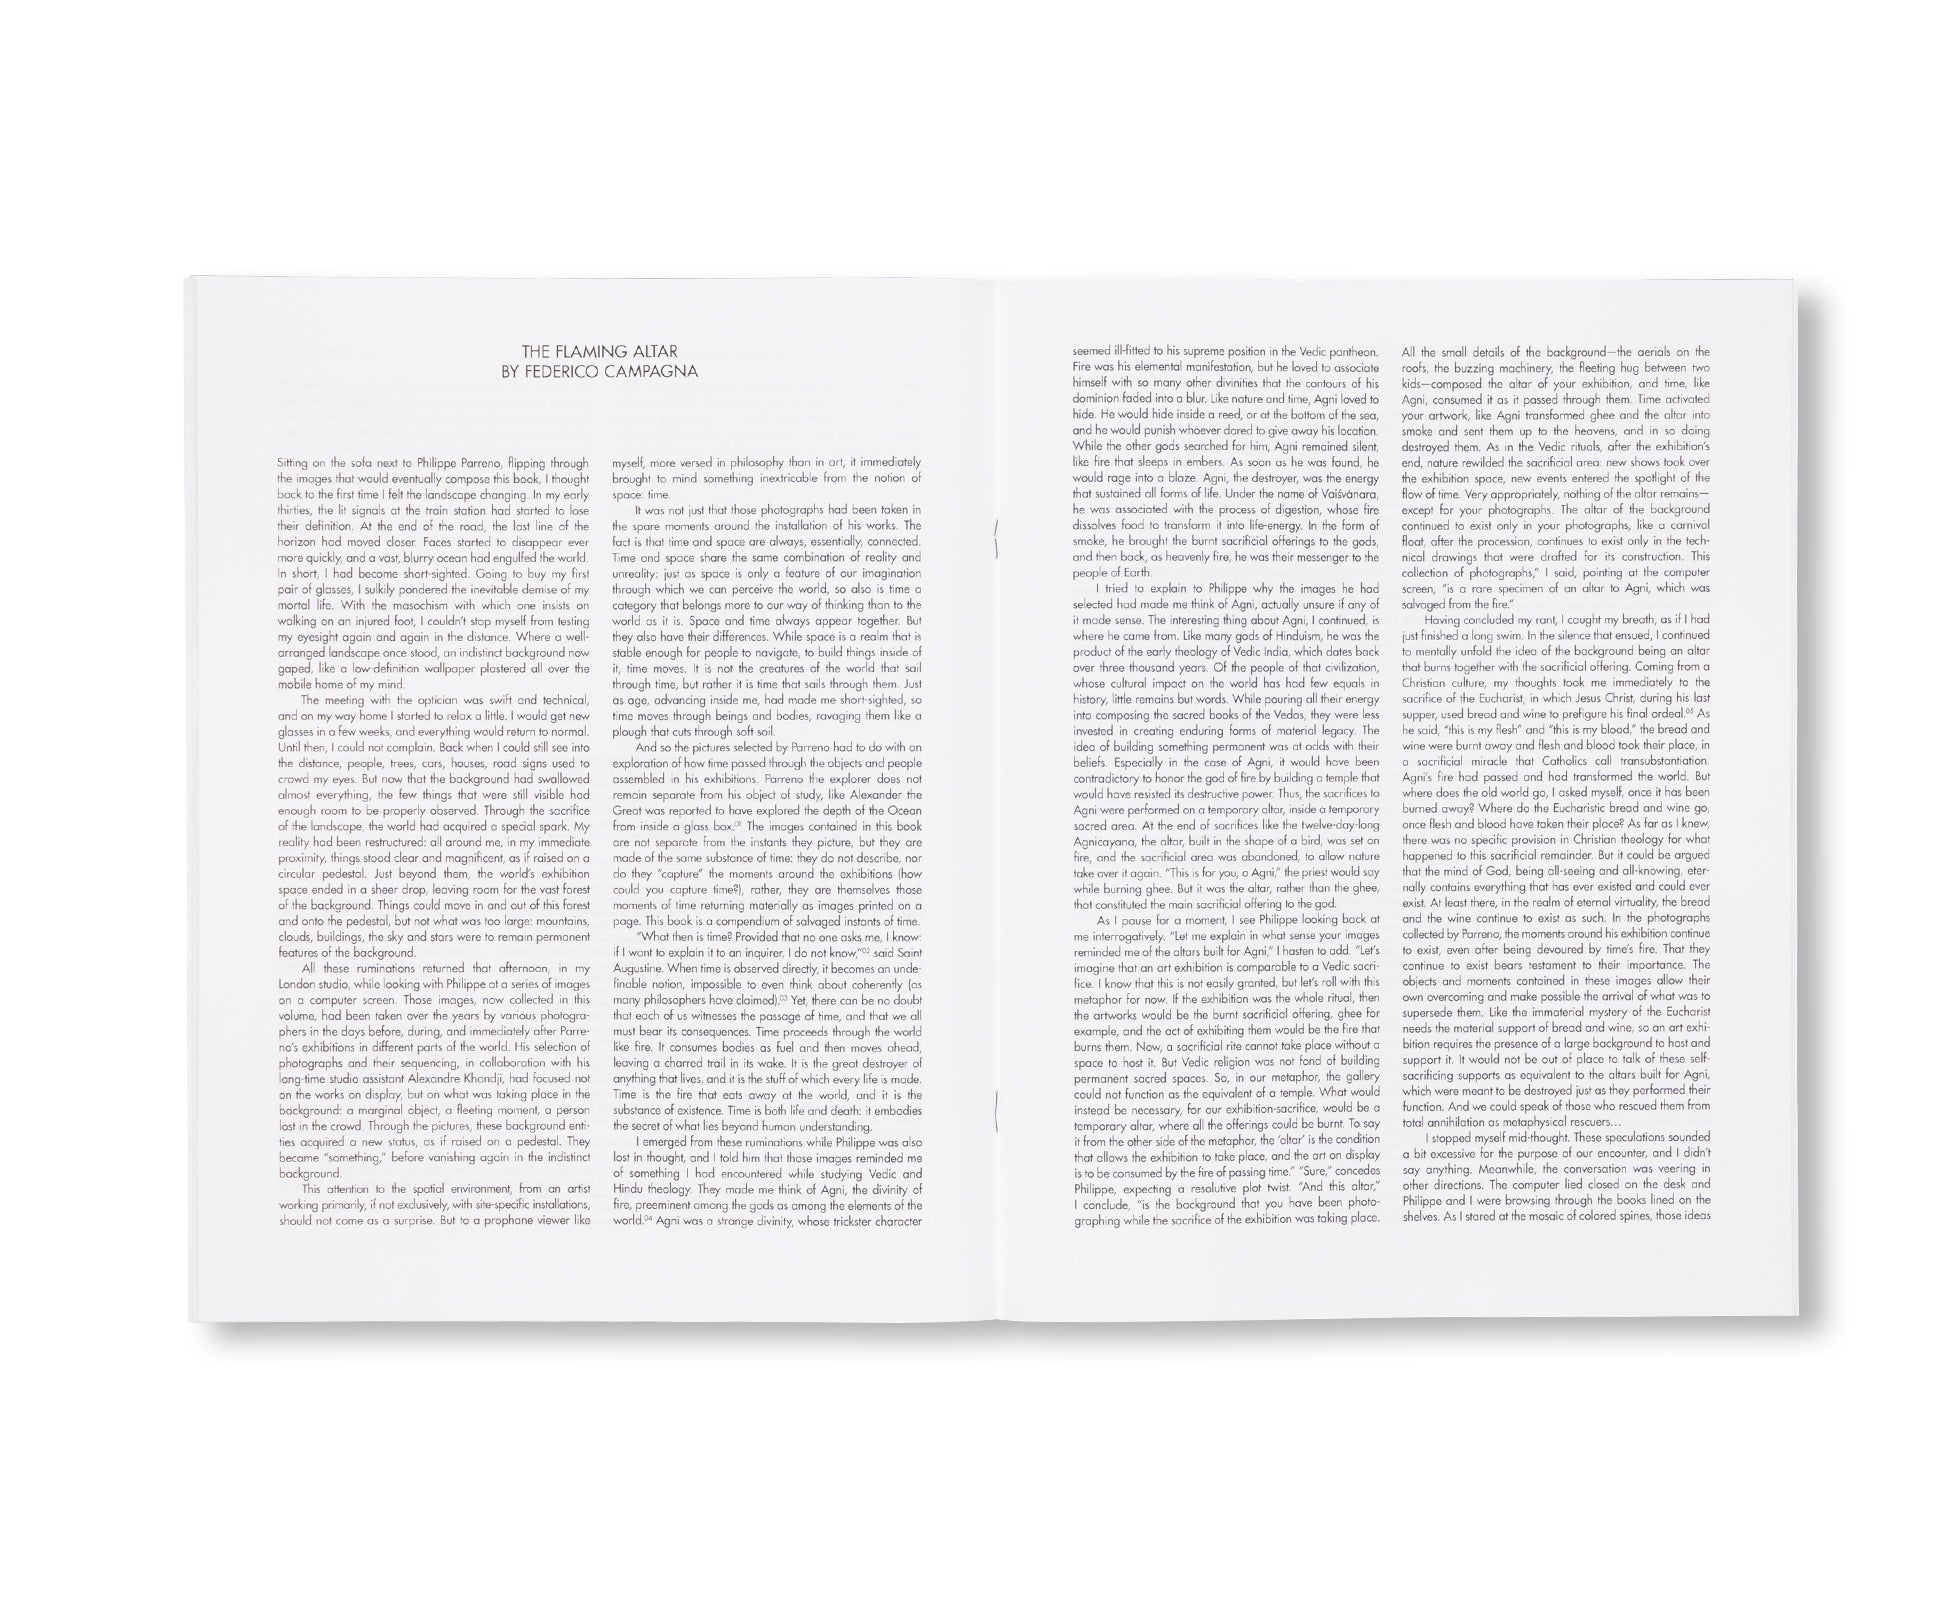 REVUE CAHIERS D’ART, 2023, PHILIPPE PARRENO by Philippe Parreno [STANDARD EDITION]